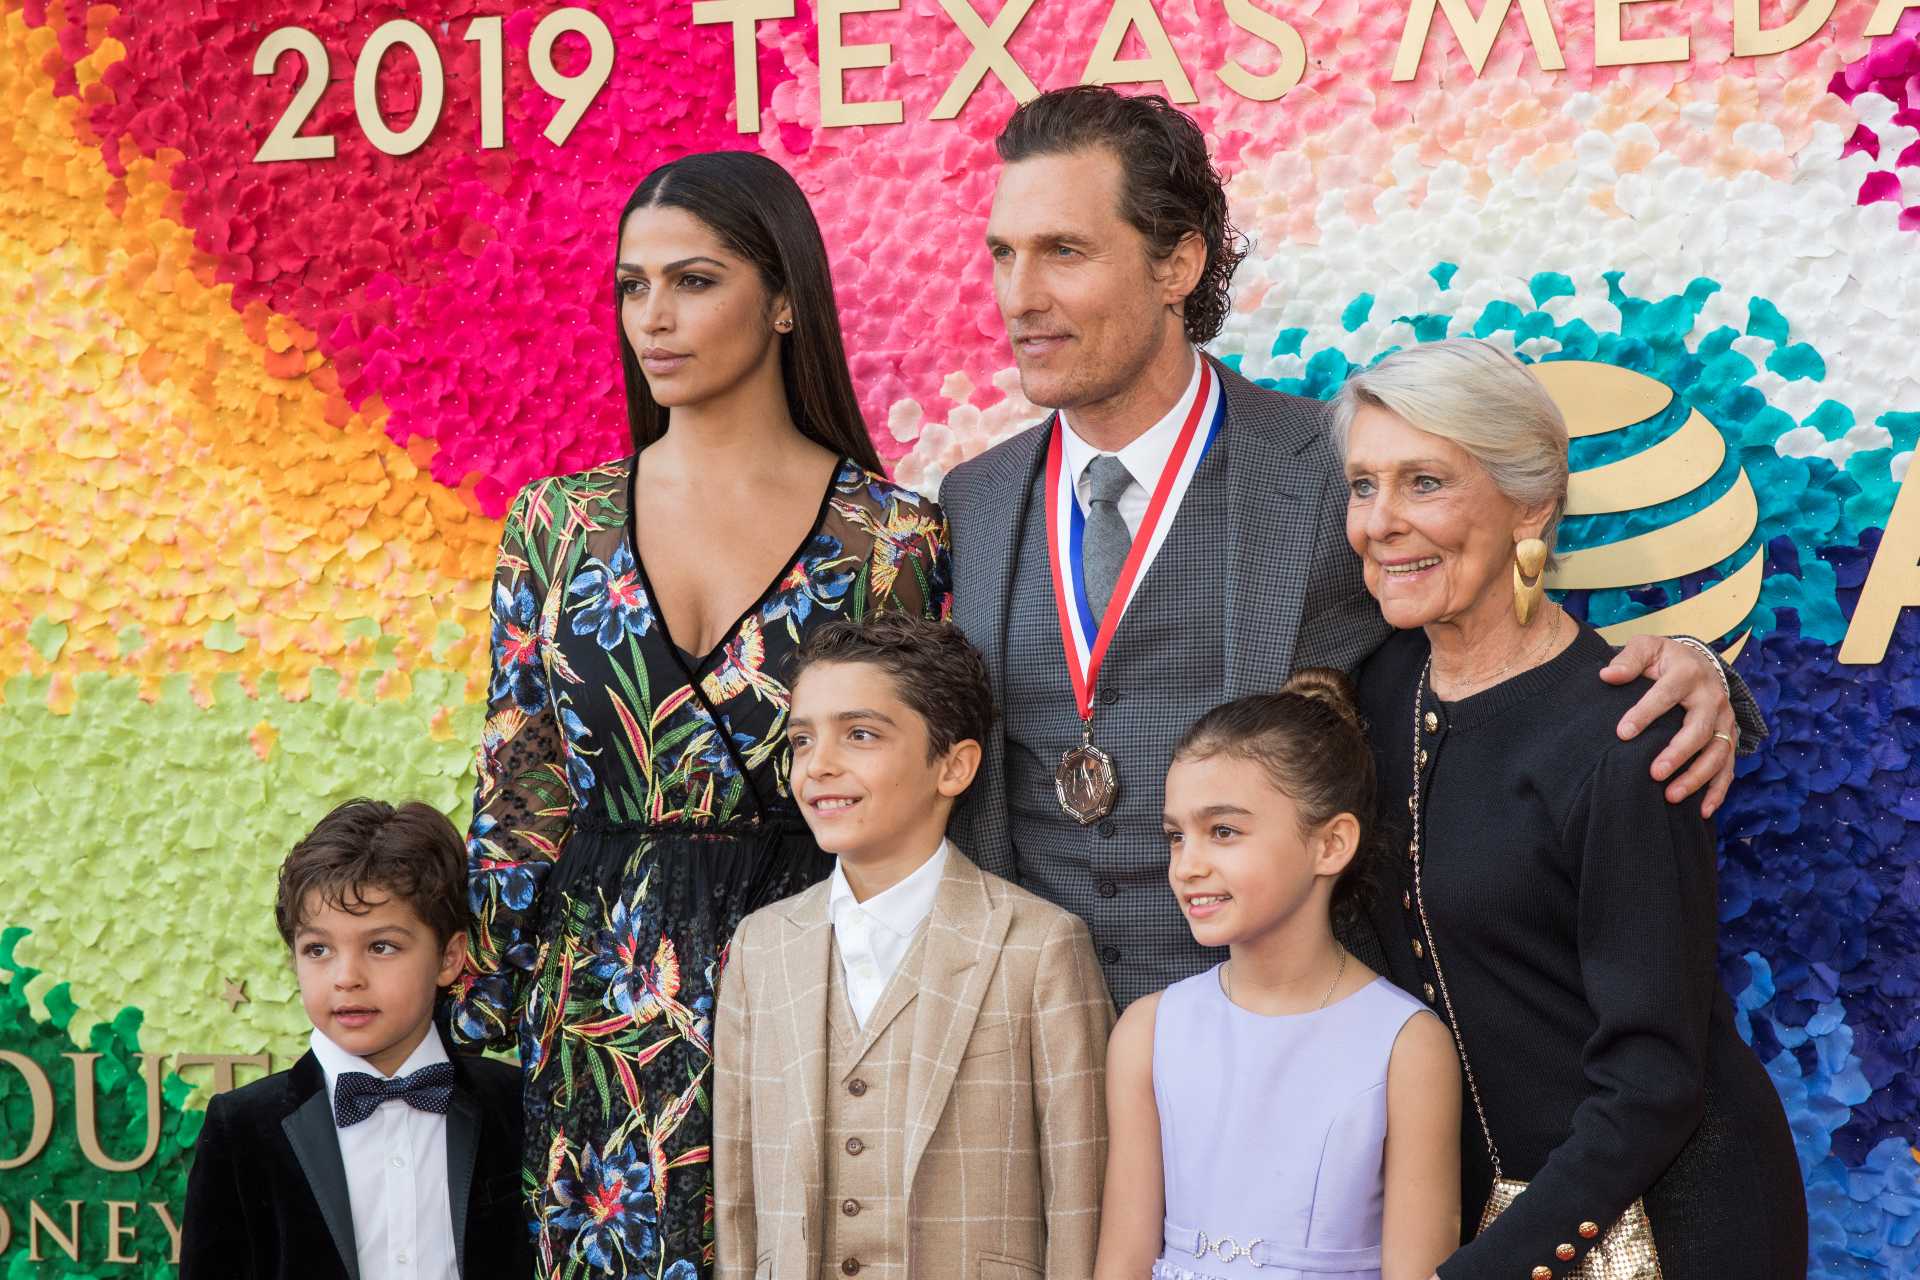 Matthew McConaughey with his family | Rick Kern/WireImage